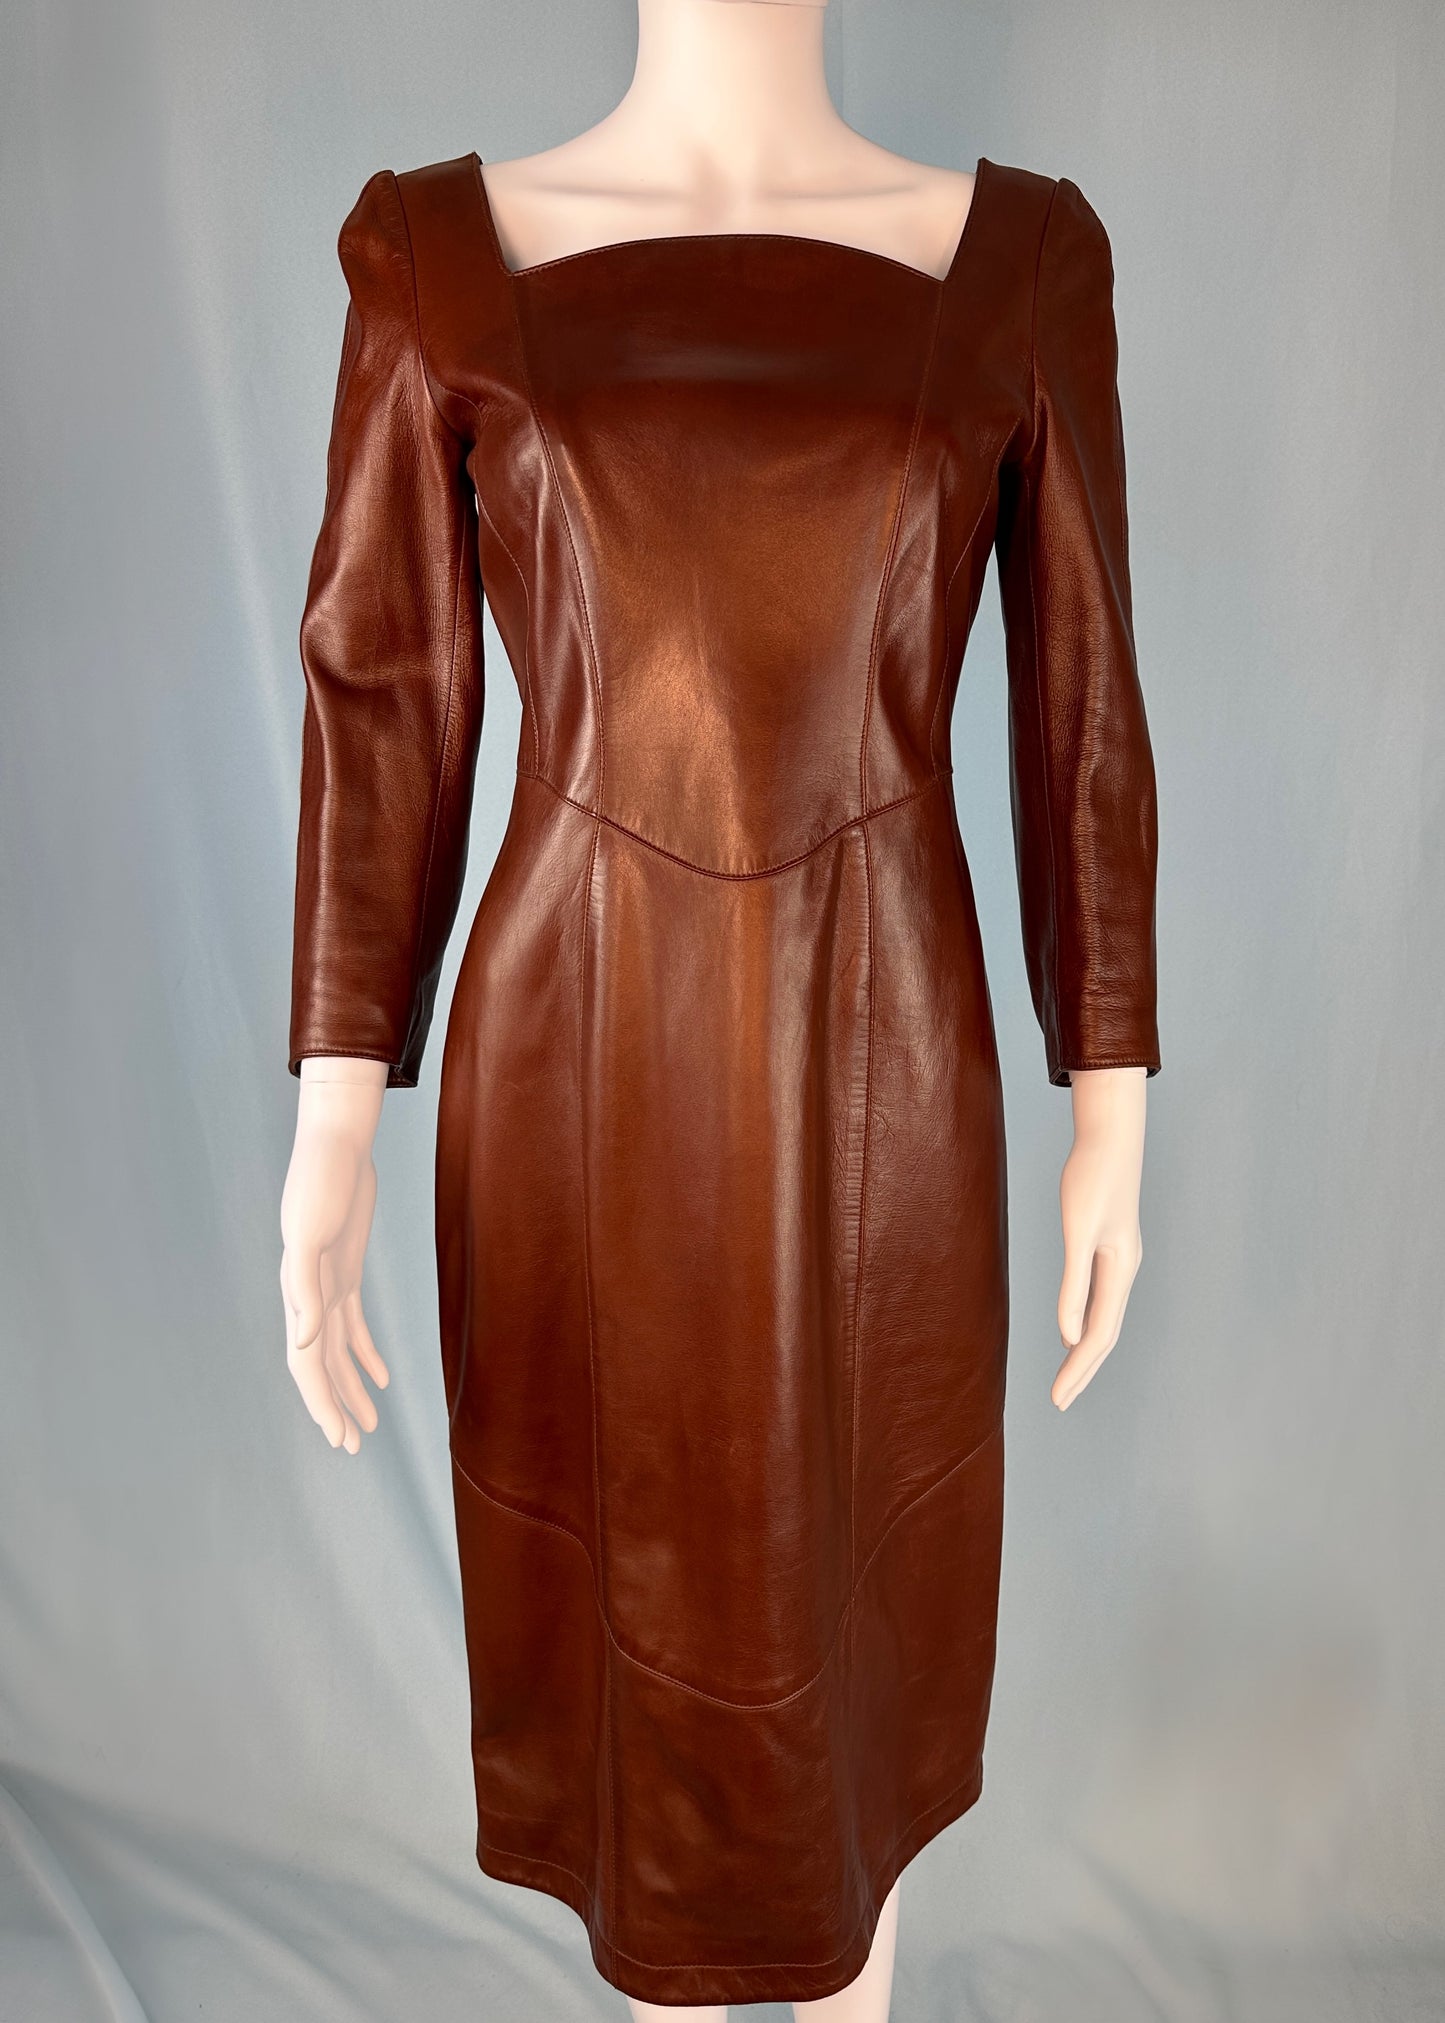 Thierry Mugler Fall 1999 Brown Leather Contour Dress